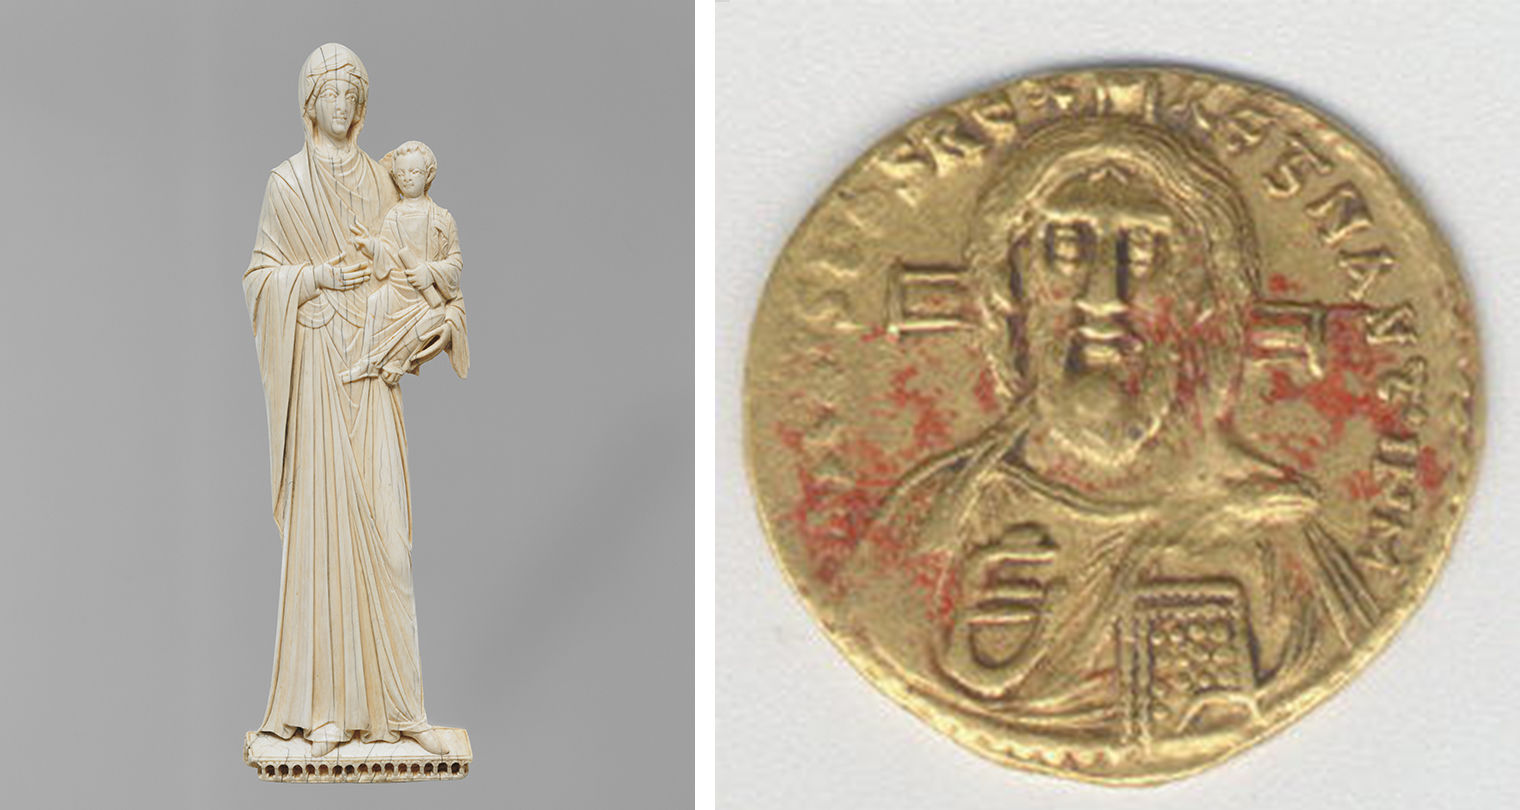 A combine shot of two images separated by a white bar in the middle. On the left is a white-yellow ivory figure of the virgin and child against a gray background. On the right is a gold byzantine coin with an image of christ and the cross on it. 